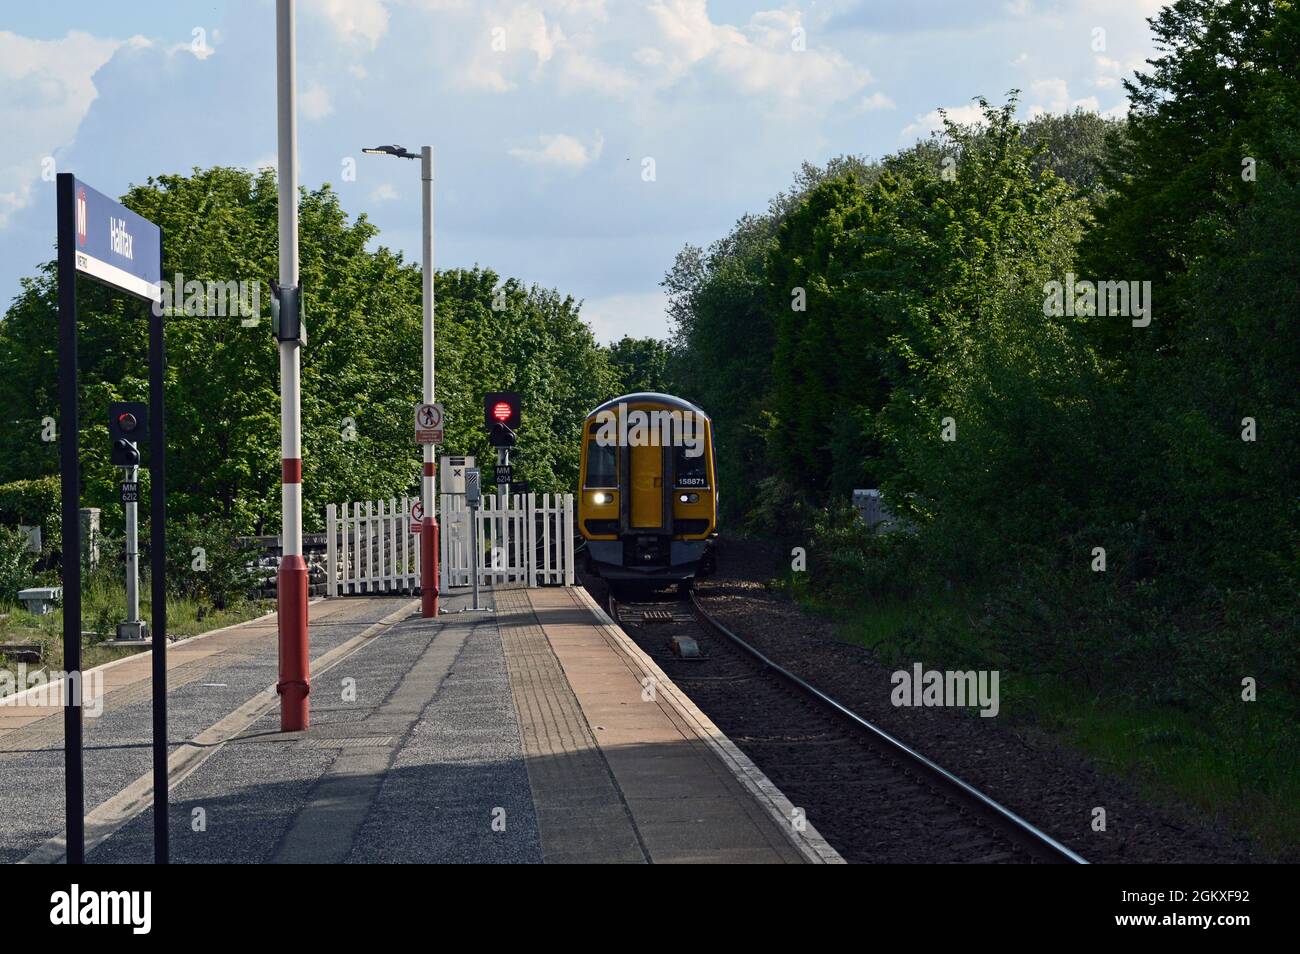 HALIFAX. WEST YORKSHIRE. ENGLAND. 05-29-21. The railway station with a Northern Rail DMU class 158871 arriving with a service from Manchester Victoria Stock Photo